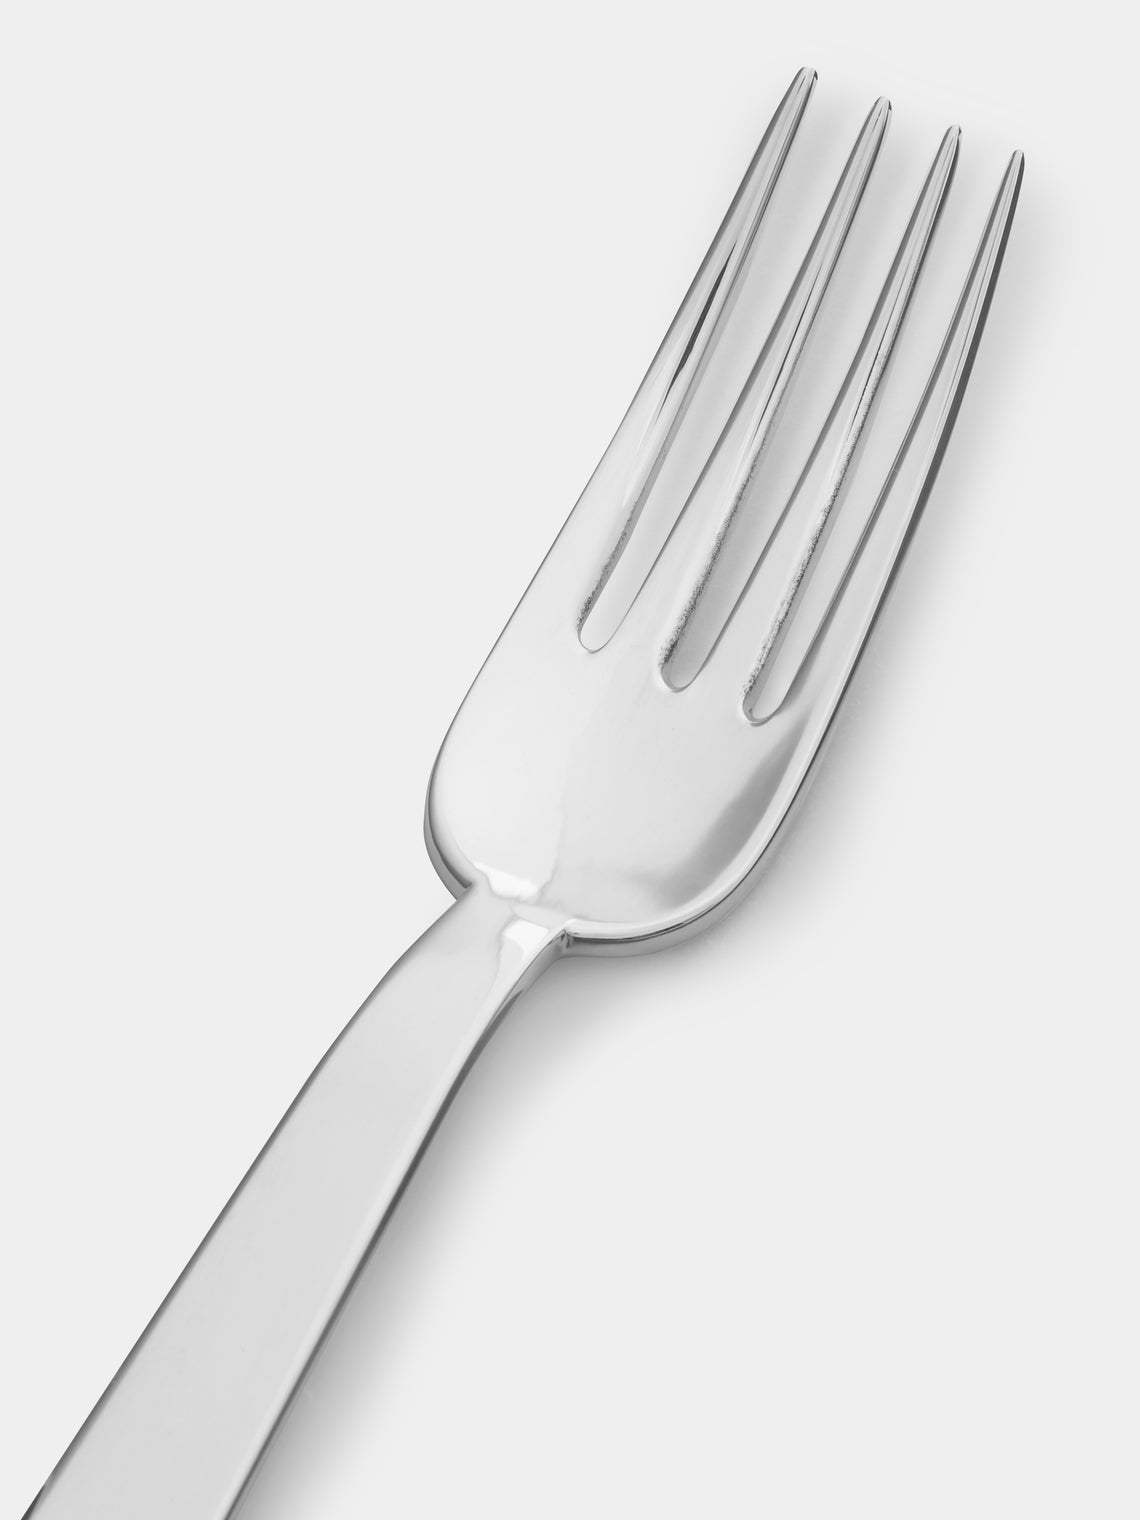 Wiener Silber Manufactur - Josef Hoffmann 135 Silver-Plated Pastry Fork - Silver - ABASK